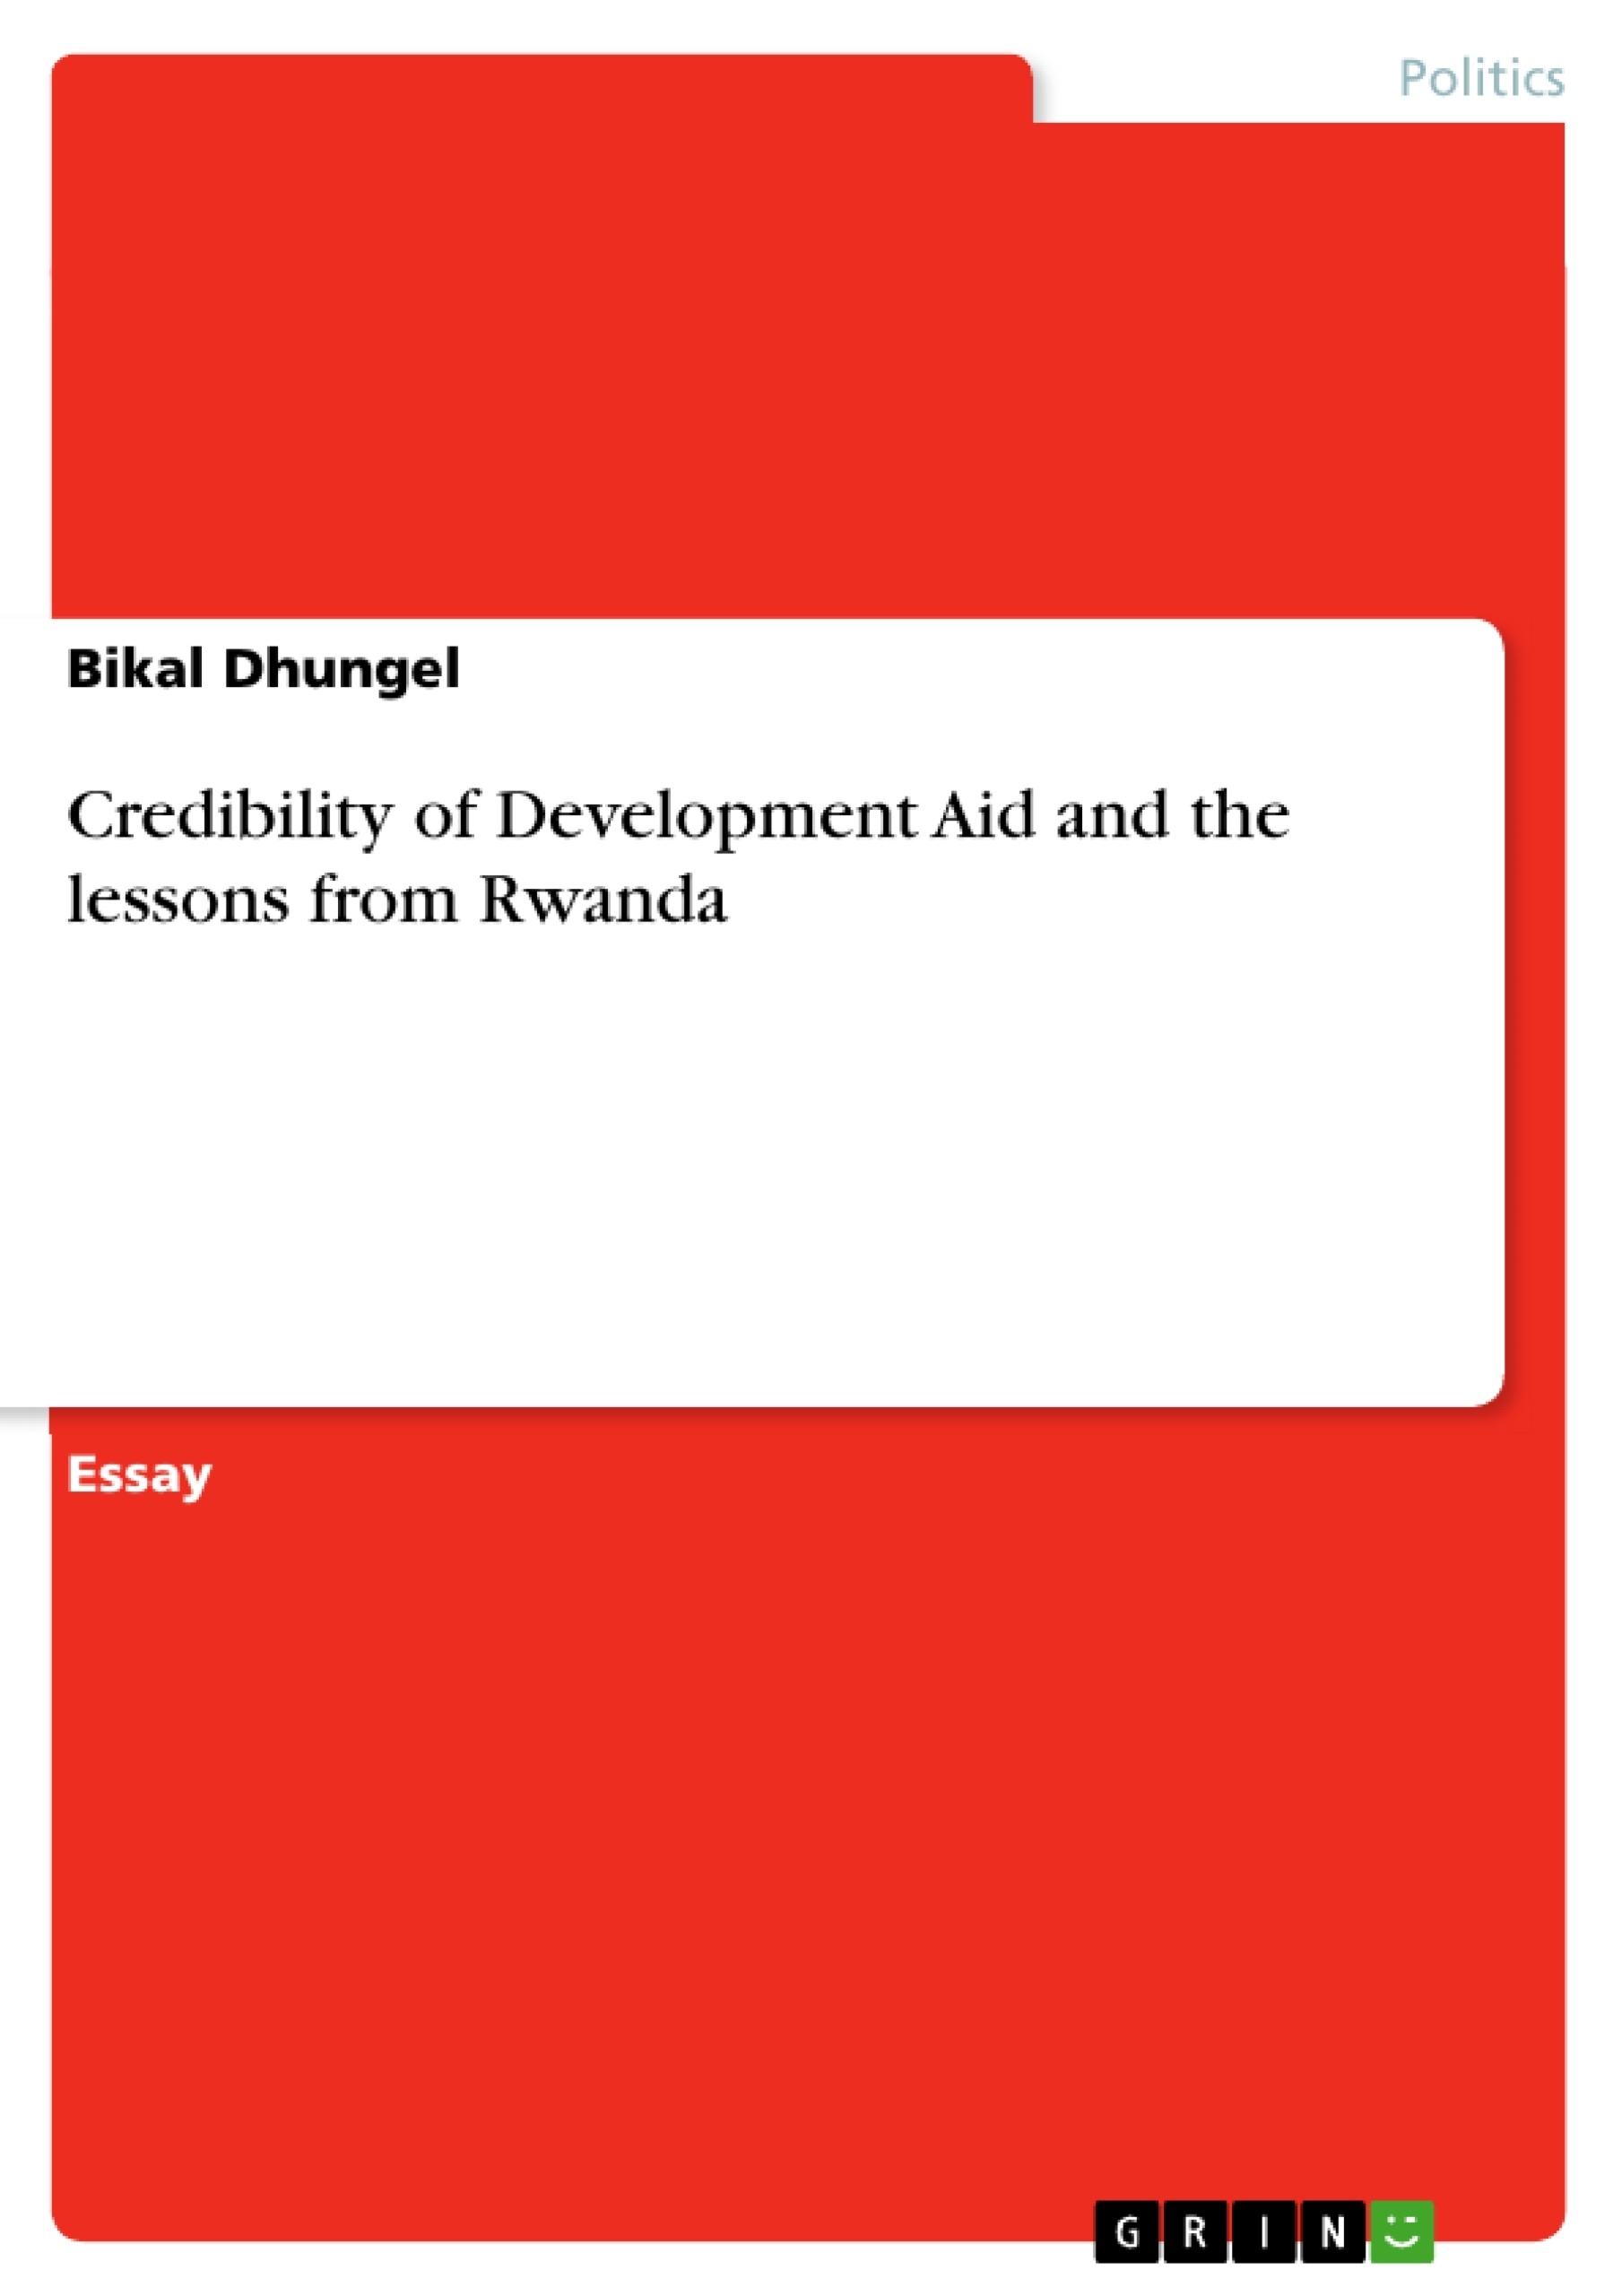 Título: Credibility of Development Aid and the lessons from Rwanda